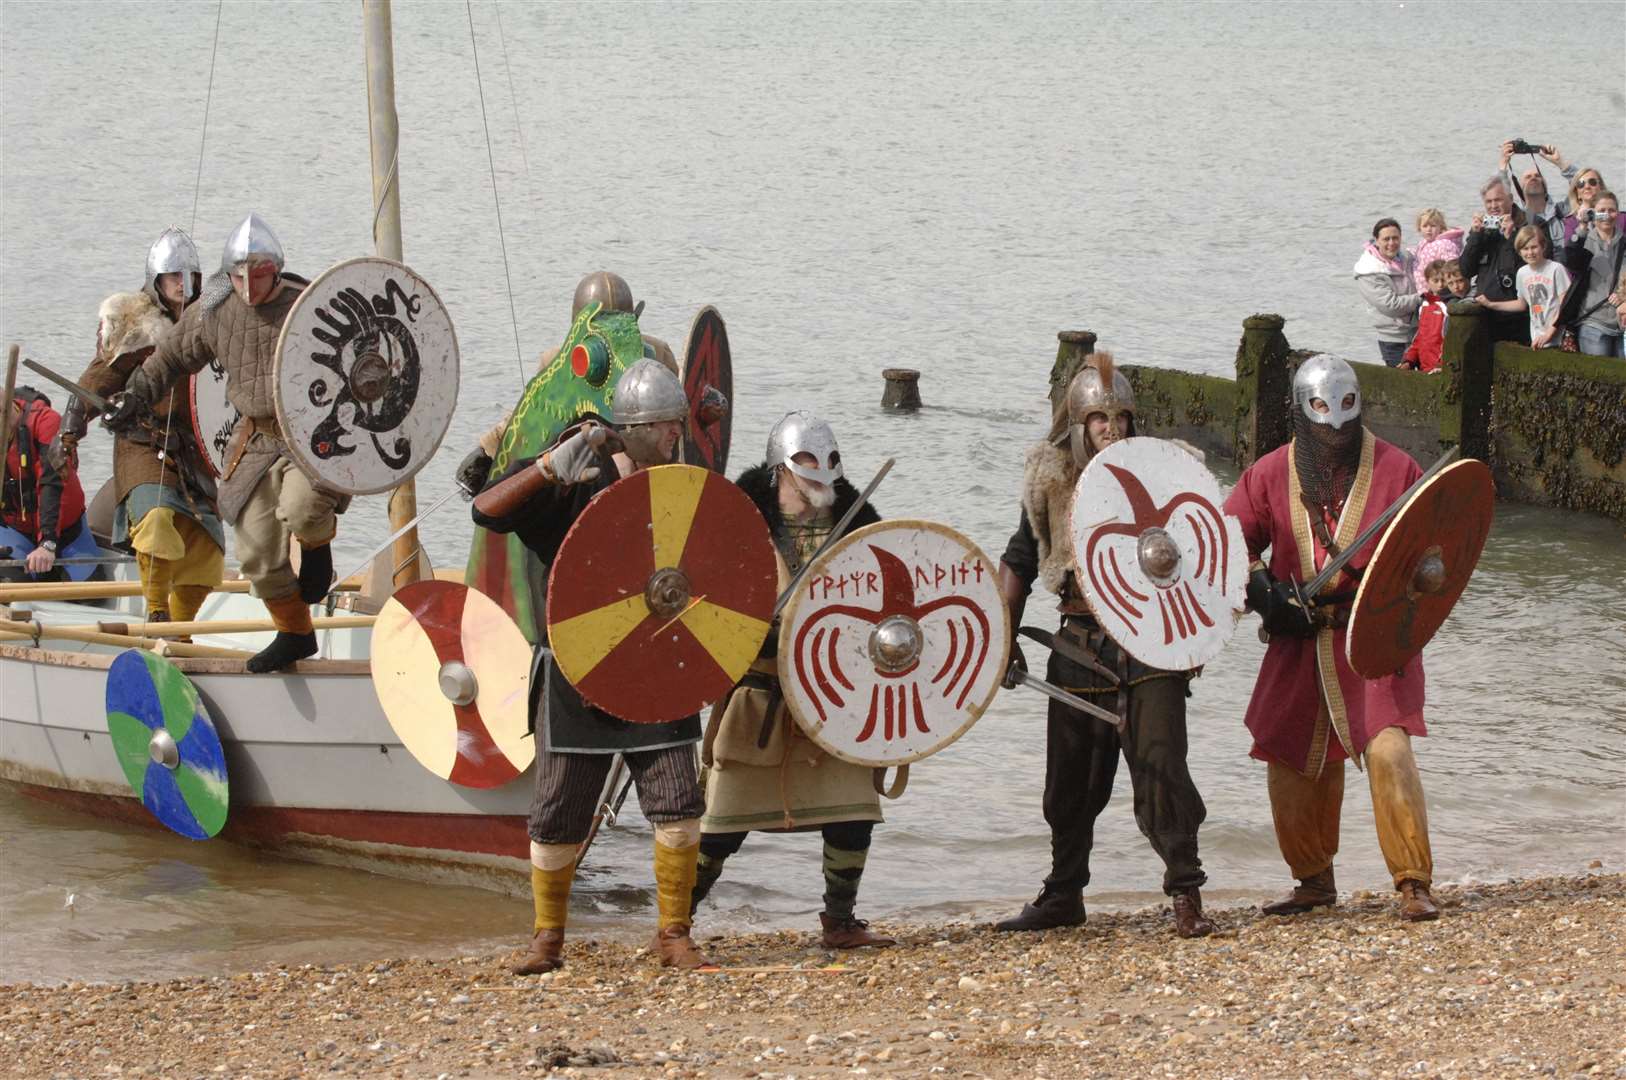 Evidence shows Kent remained a wealthy and important place - largely because of the strength of church - despite the Viking raids